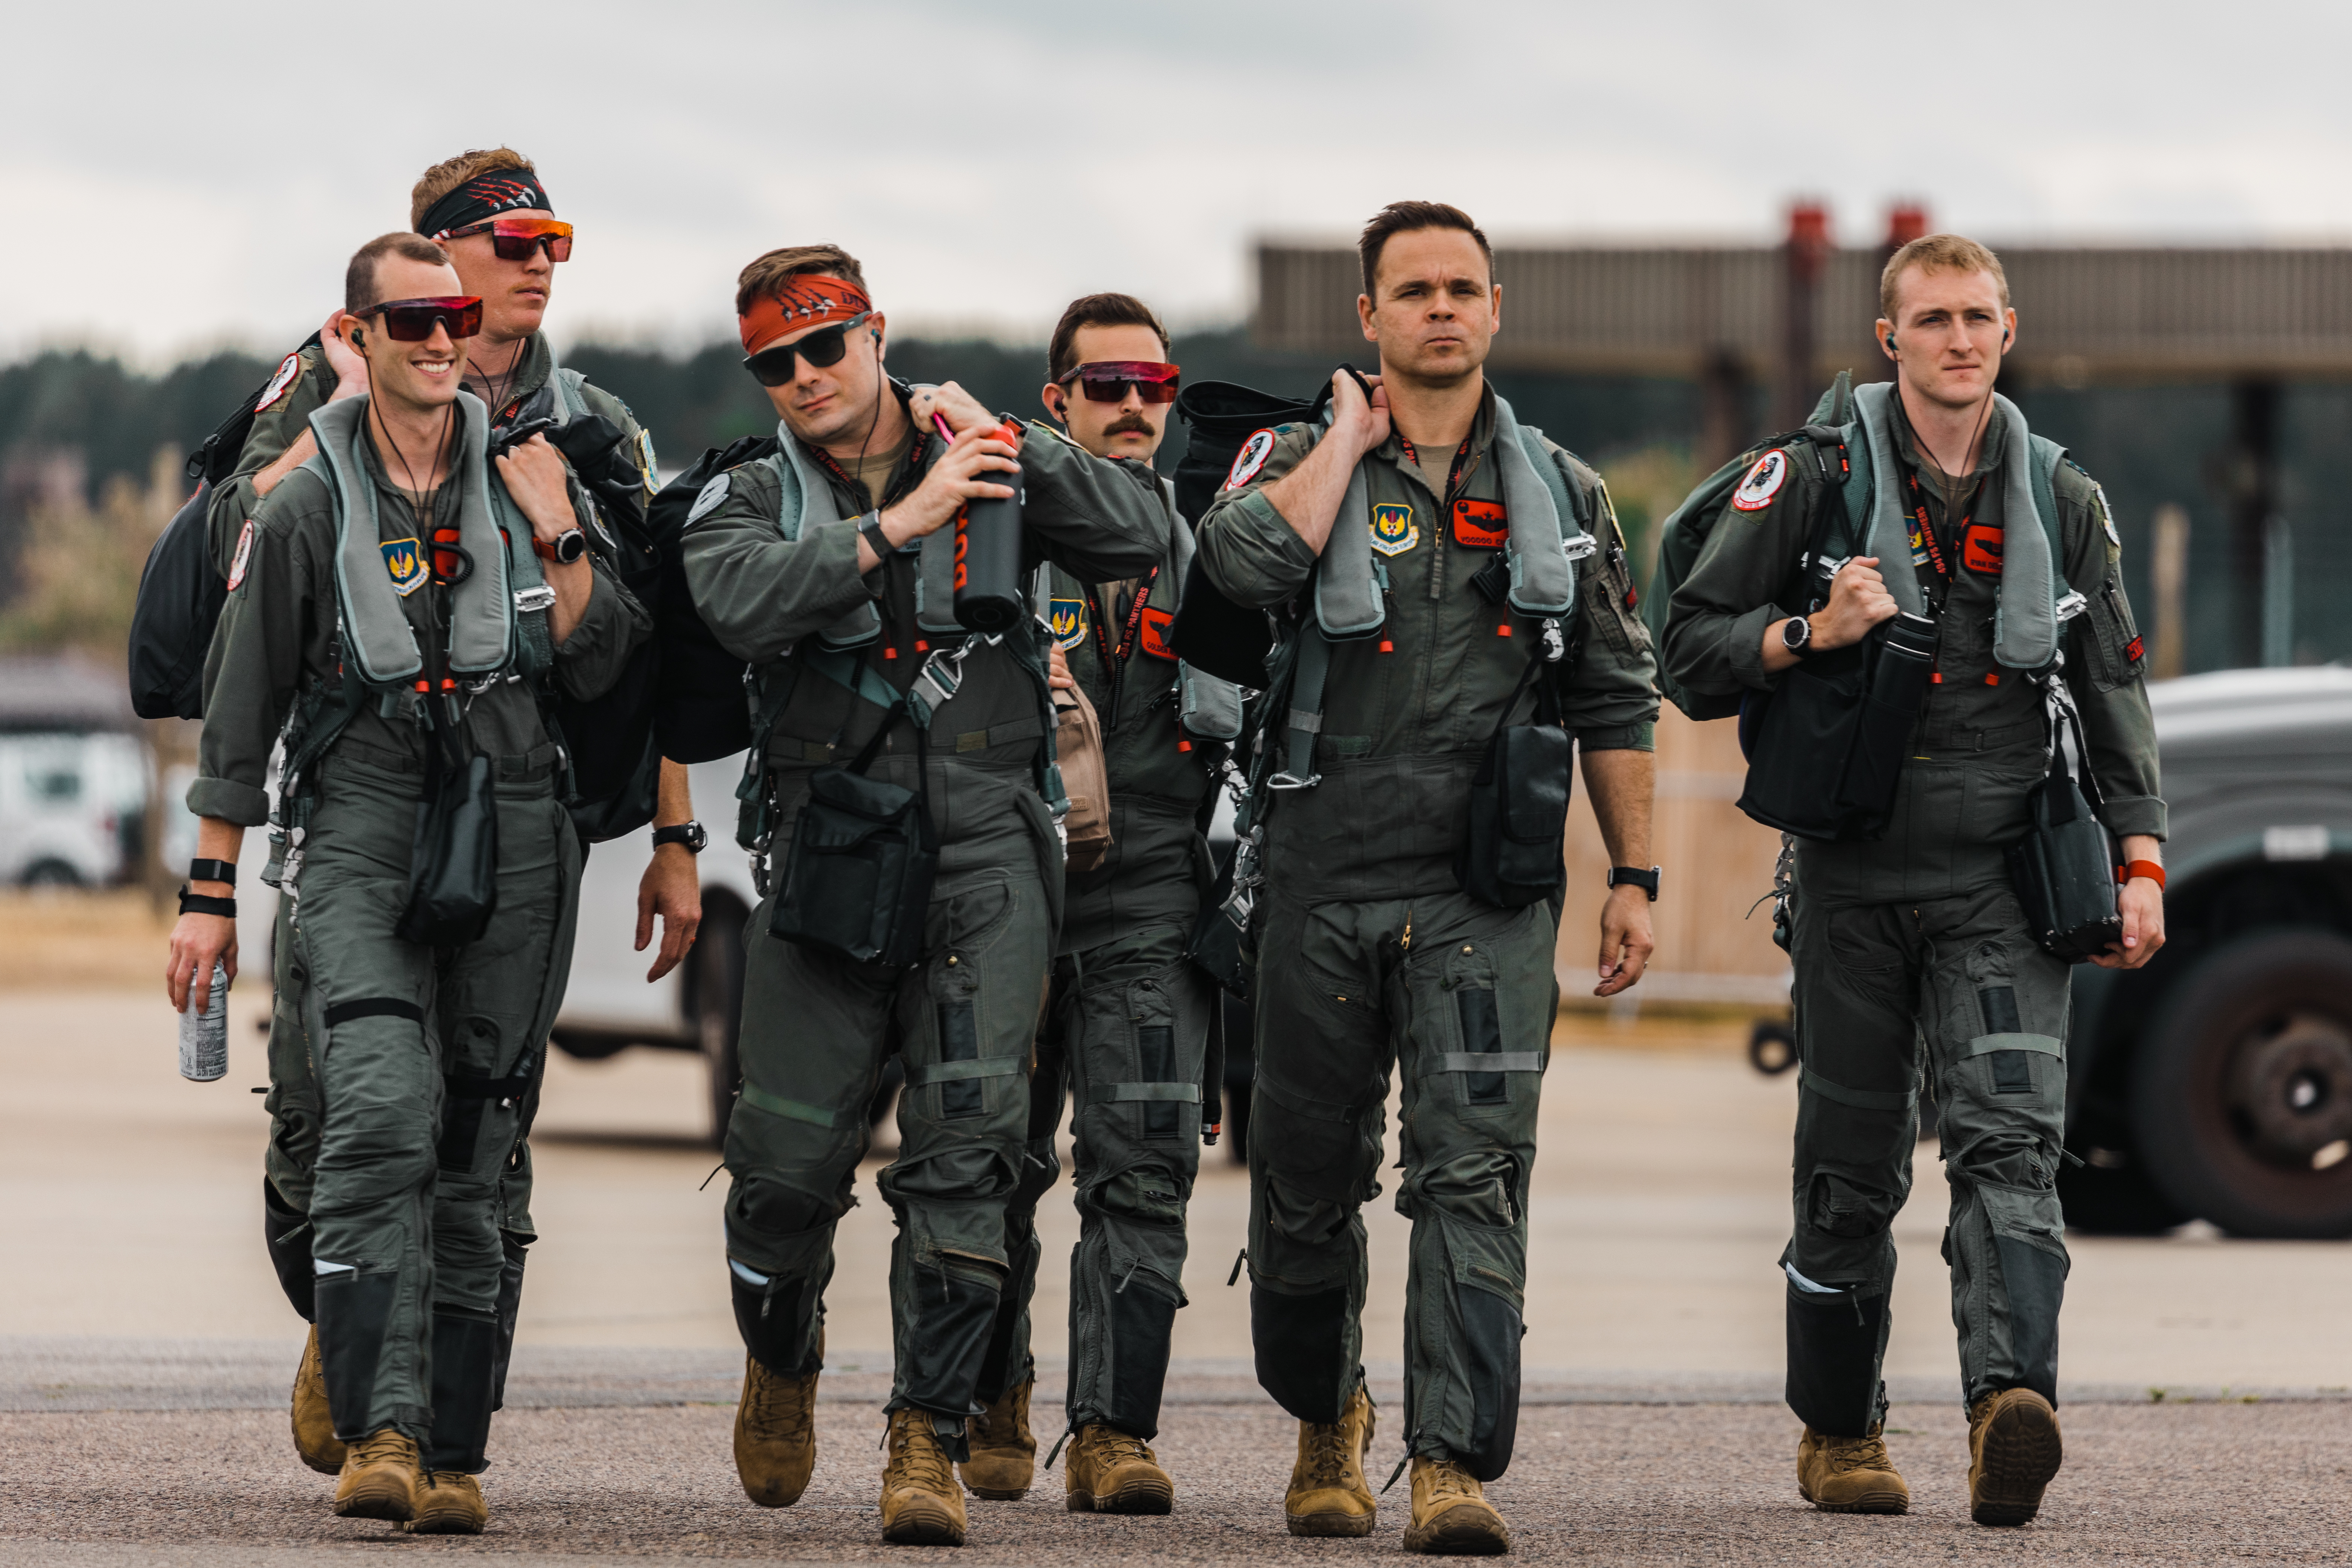 Image shows aviators walking together on the airfield.